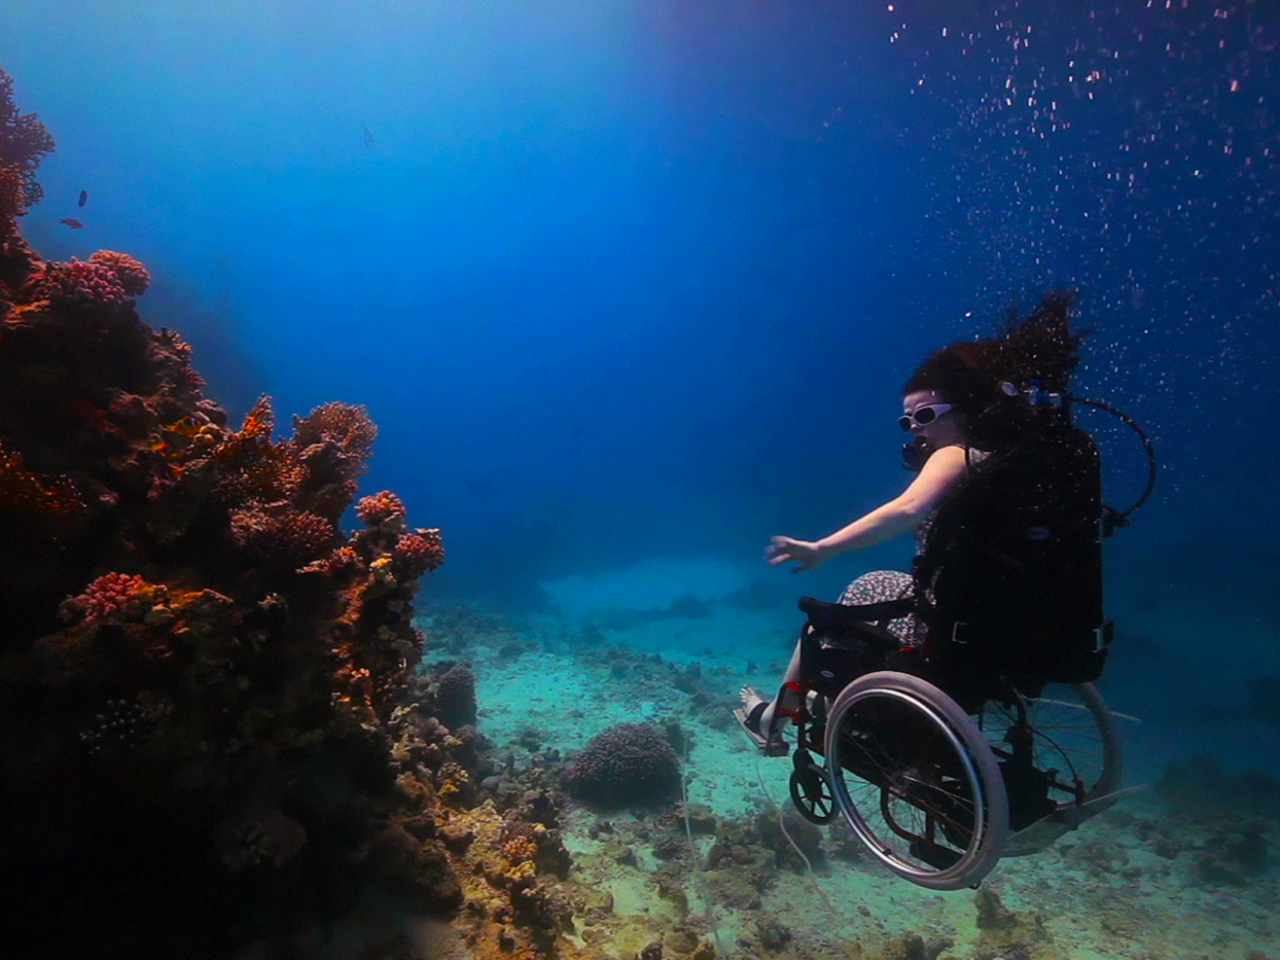 Film still from Fixed of a woman scuba diving, exploring a coral reef from her manual wheelchair.